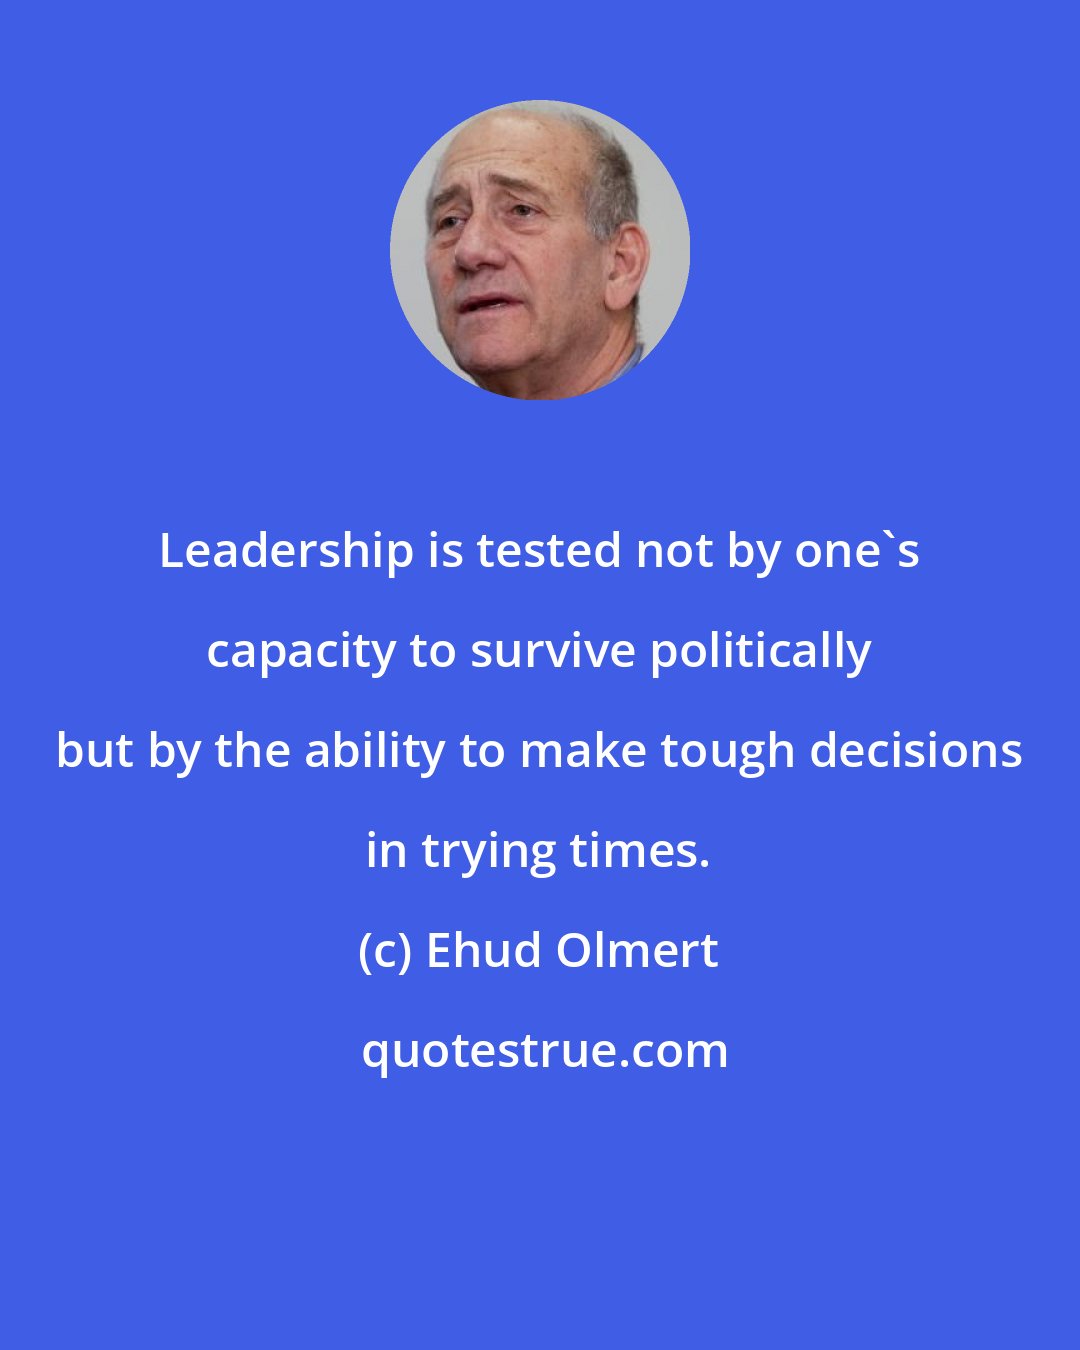 Ehud Olmert: Leadership is tested not by one's capacity to survive politically but by the ability to make tough decisions in trying times.